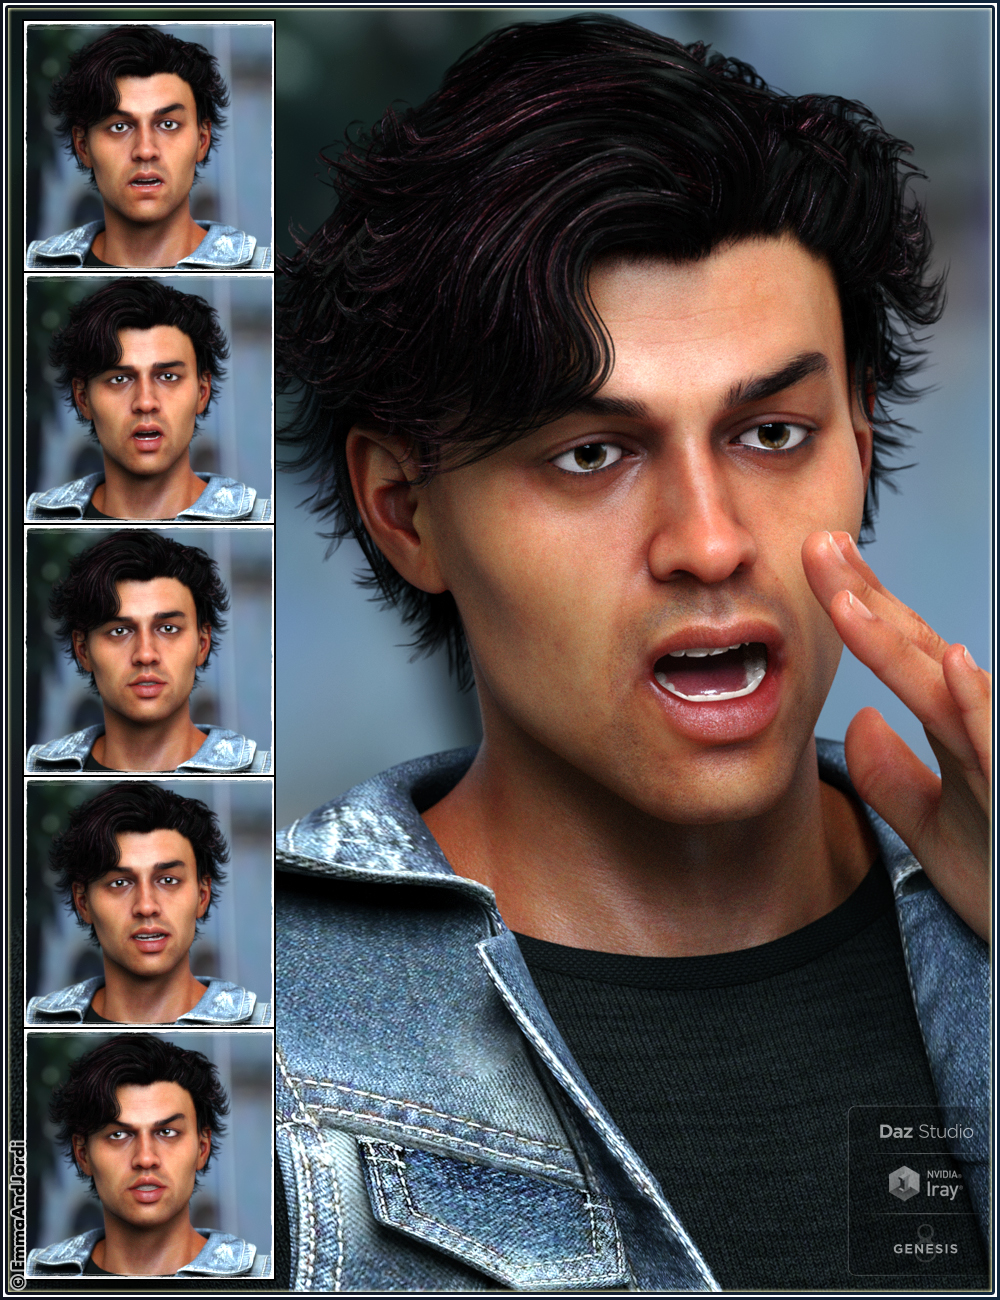 Mixable Expressions for Diego 8 and Genesis 8 Male(s) by: , 3D Models by Daz 3D